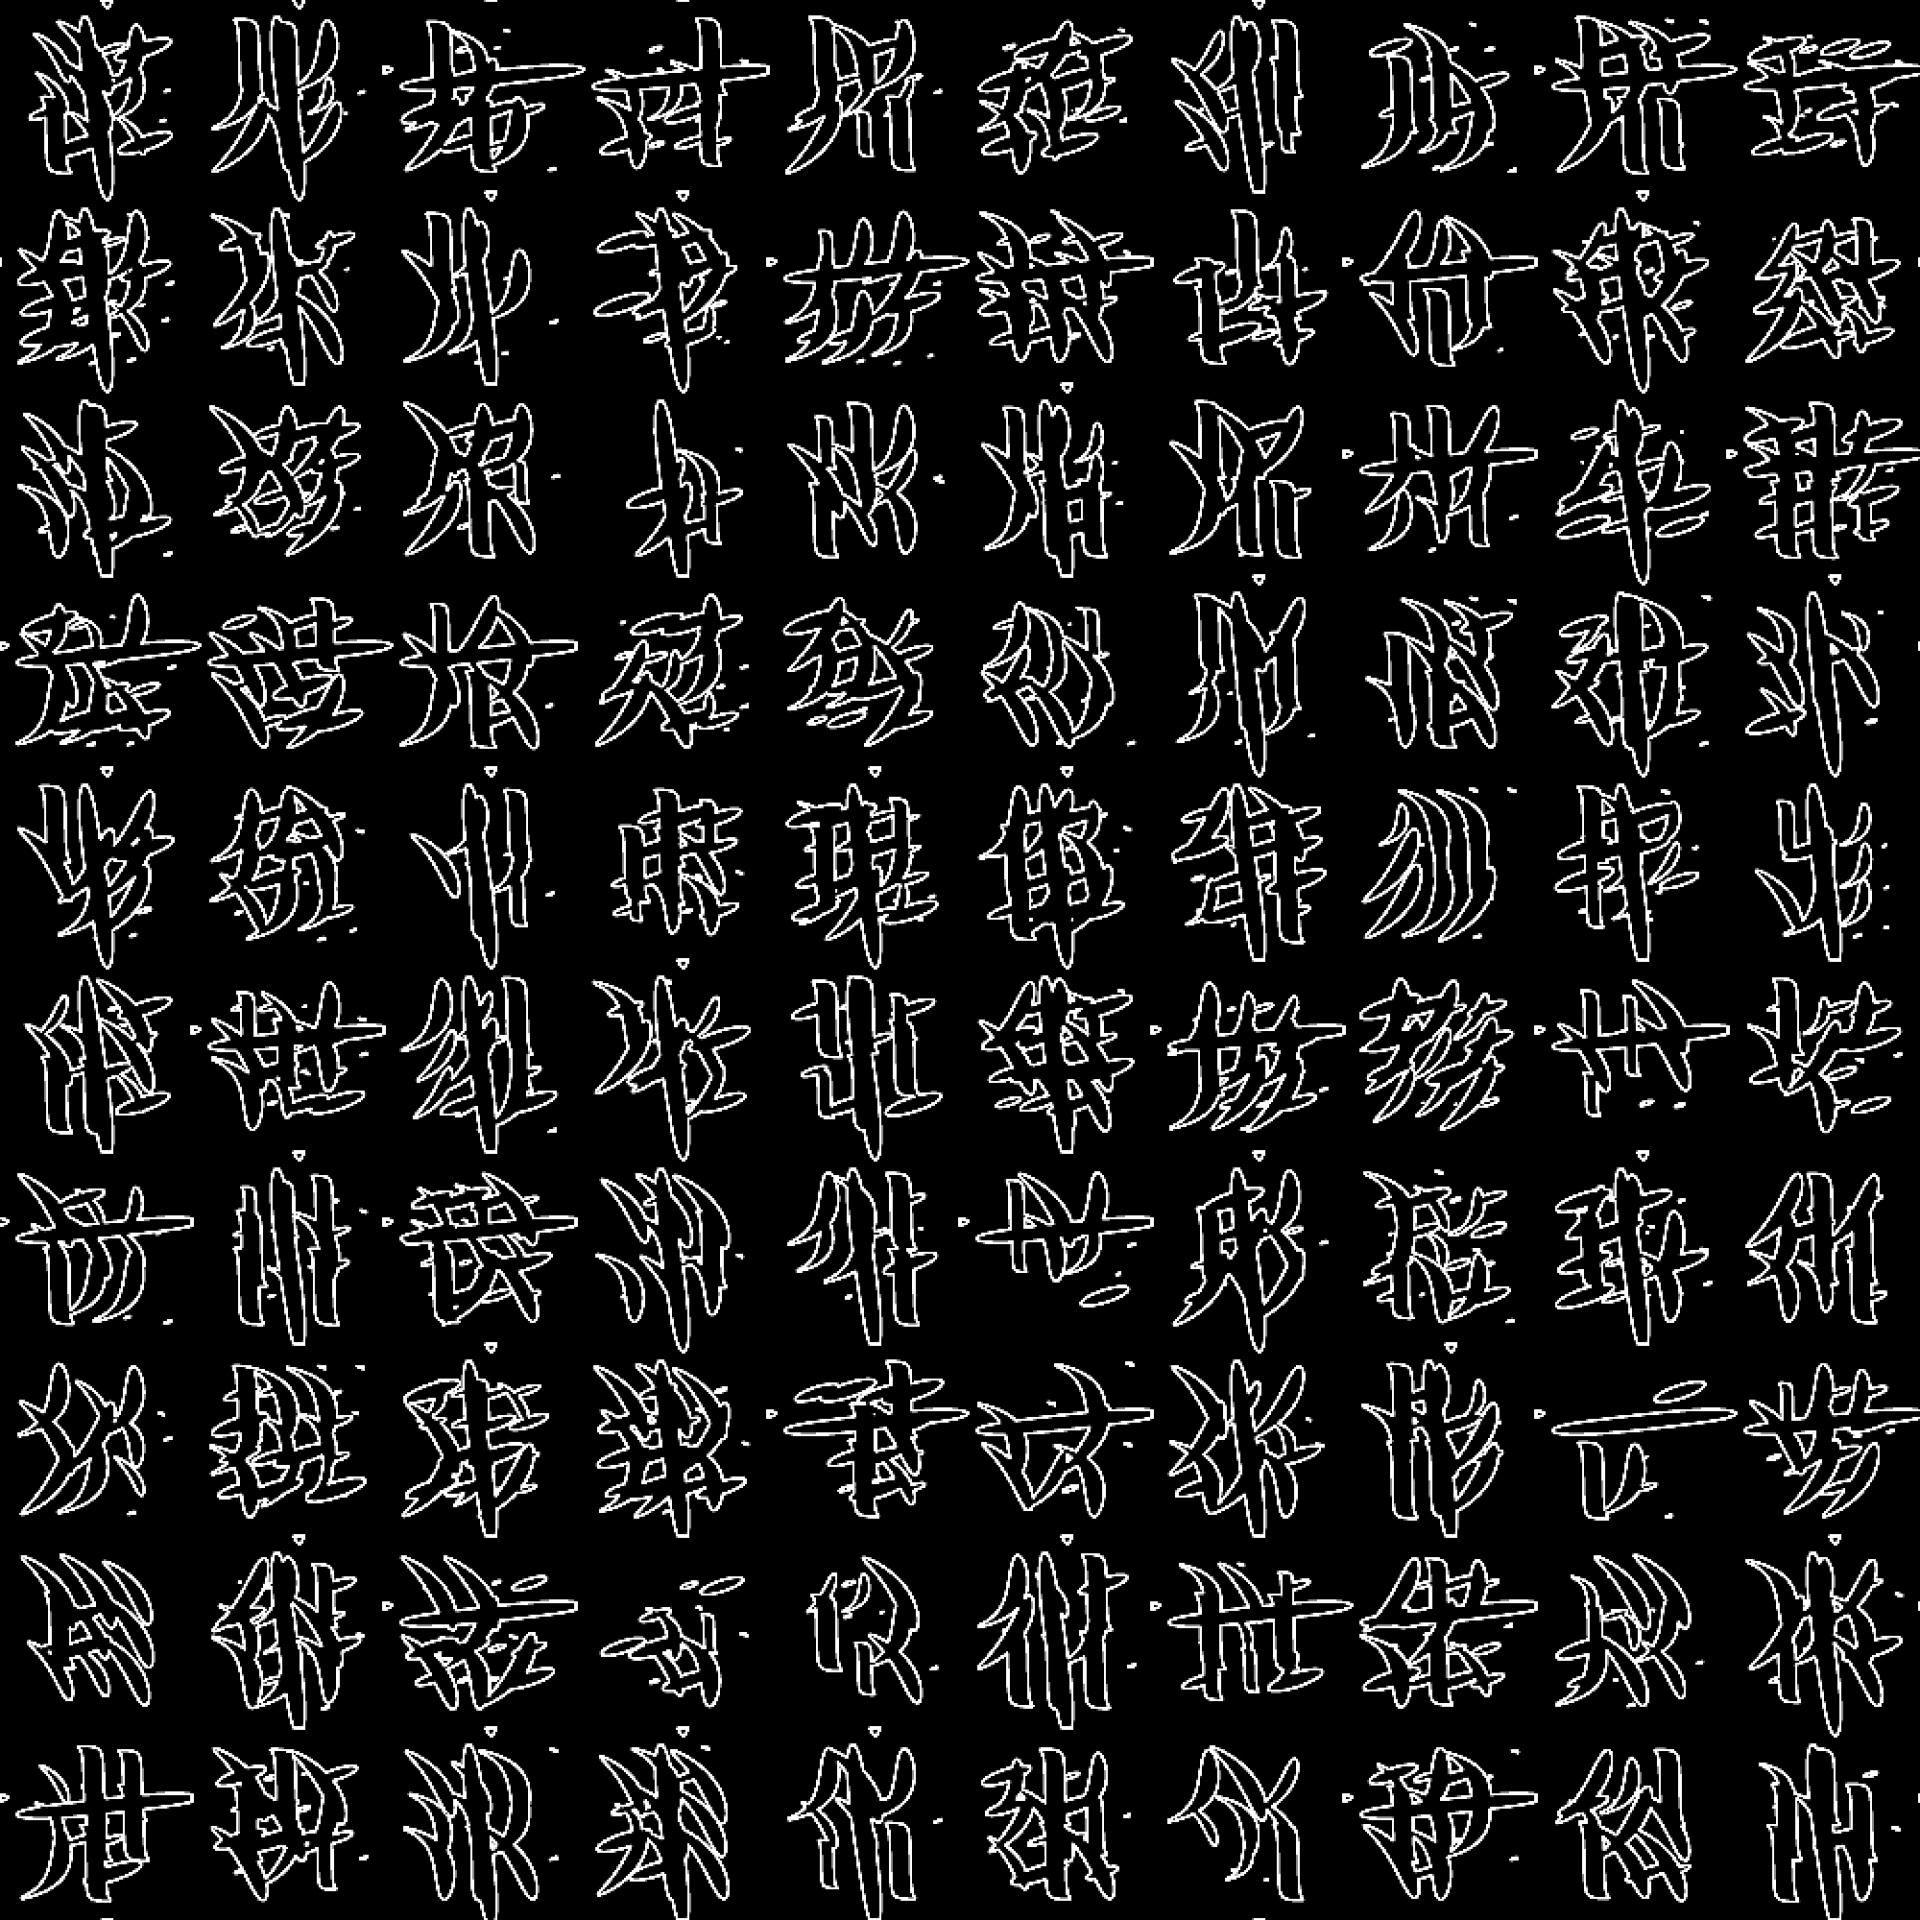 xia-script-ancient-chinese-characters-free-image-from-needpix